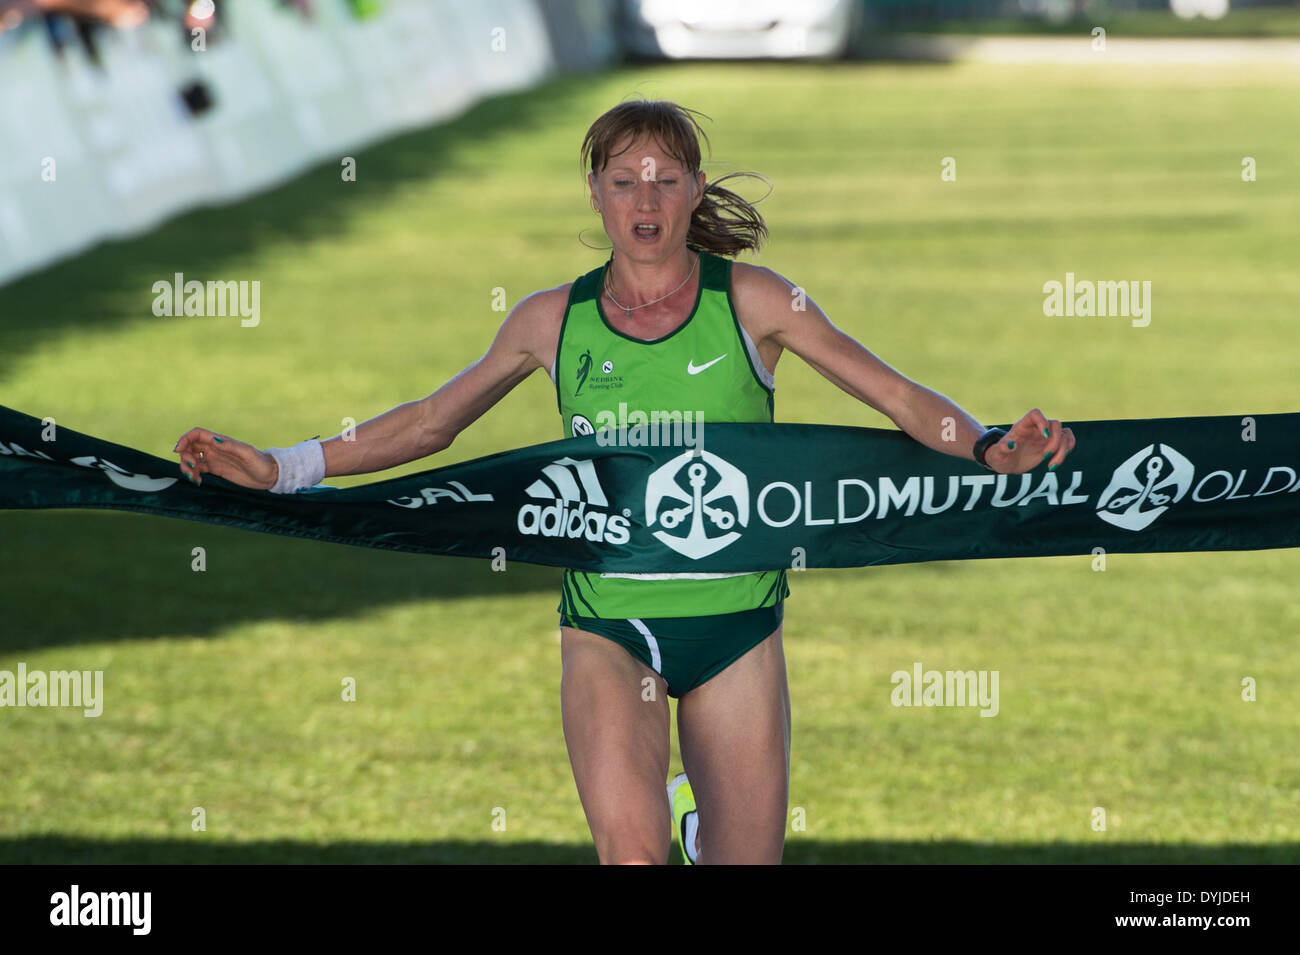 CAPE TOWN, South Africa - Saturday 19 April 2014, Womens first place winner Nina Podnebesnova during the ultra marathon of the Old Mutual Two Oceans Marathon.  Photo by Roger Sedres/ ImageSA/Alamy Live News Stock Photo